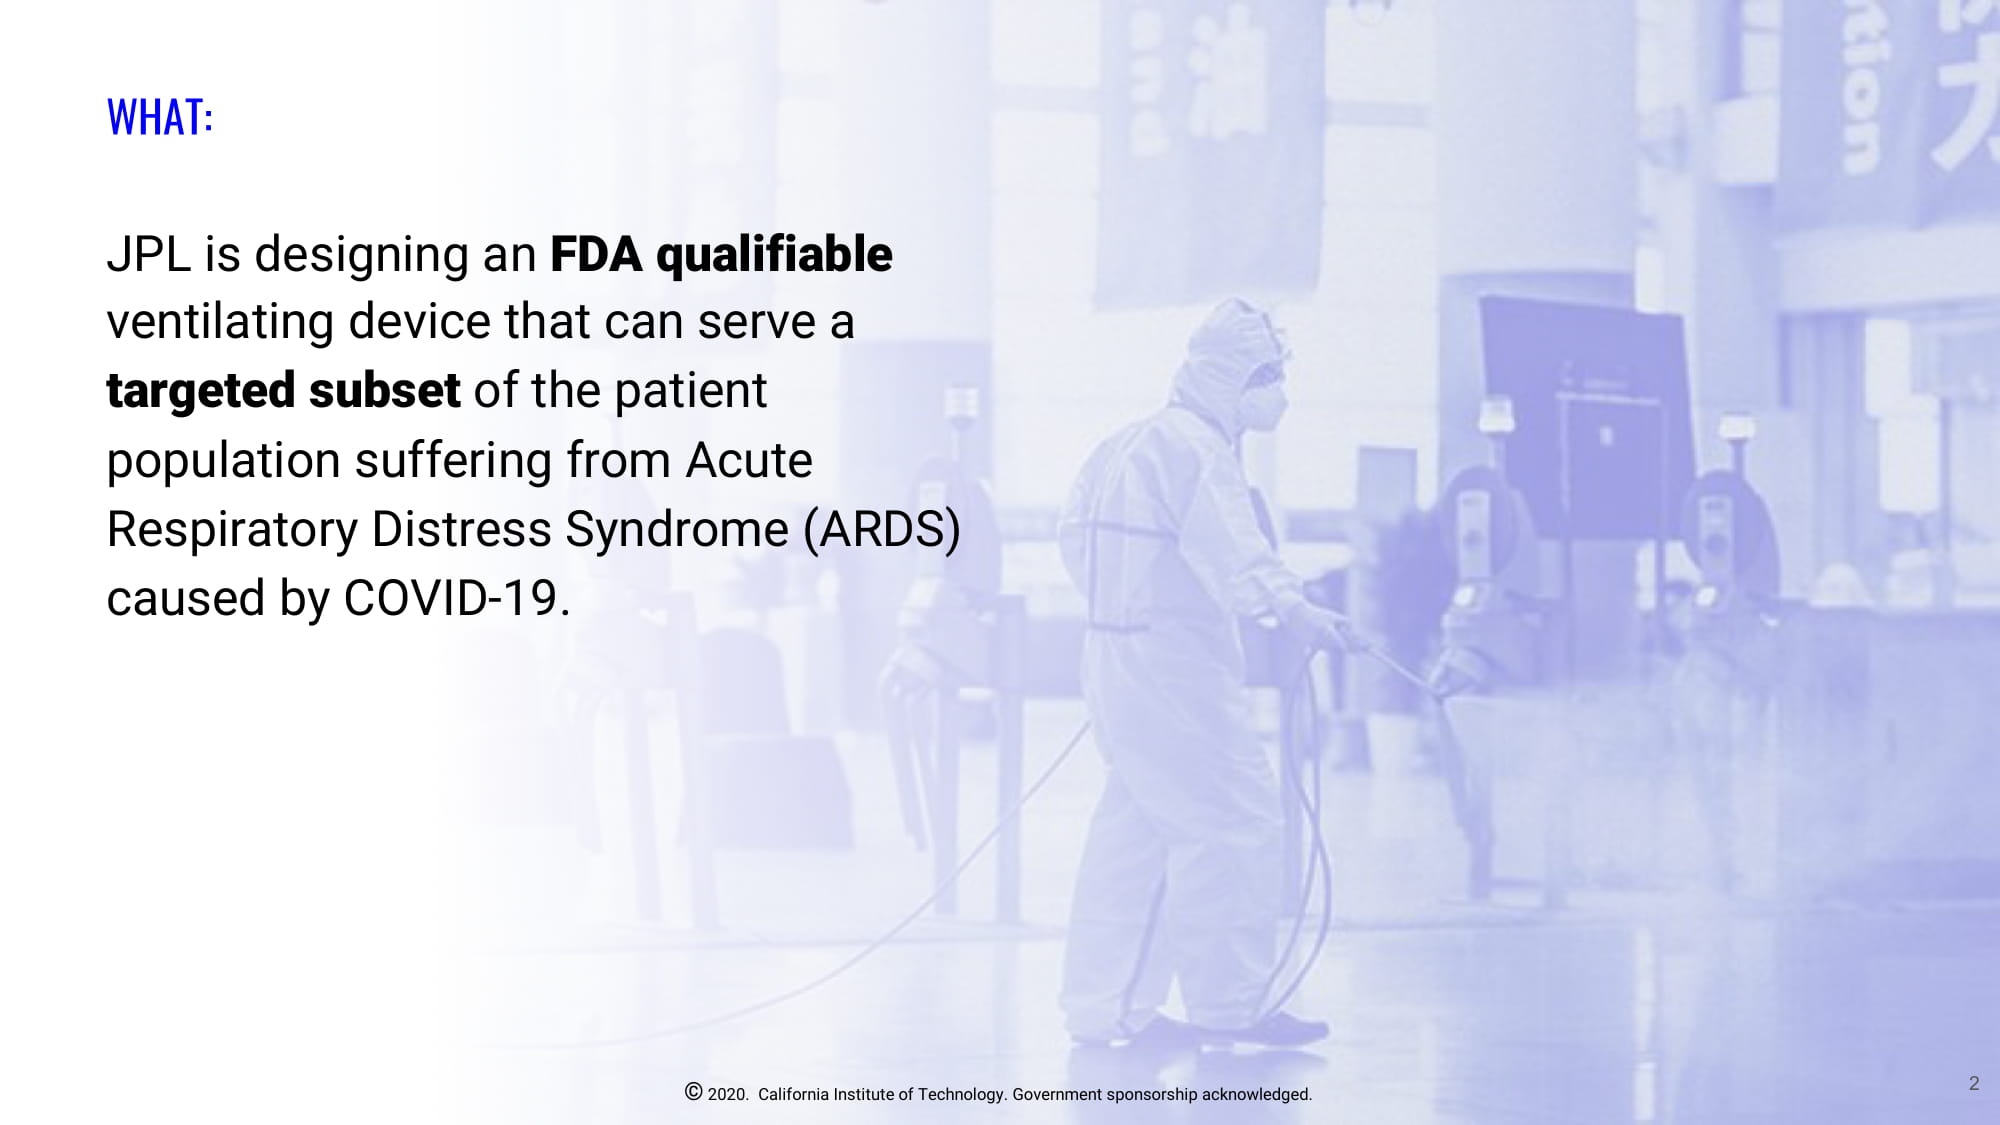 Slide 2: WHAT: JPL is designing an FDA qualifiable ventilating device that can serve a targeted subset of the patient population suffering from Acute Respiratory Distress Syndrome (ARDS) caused by COVID-19.